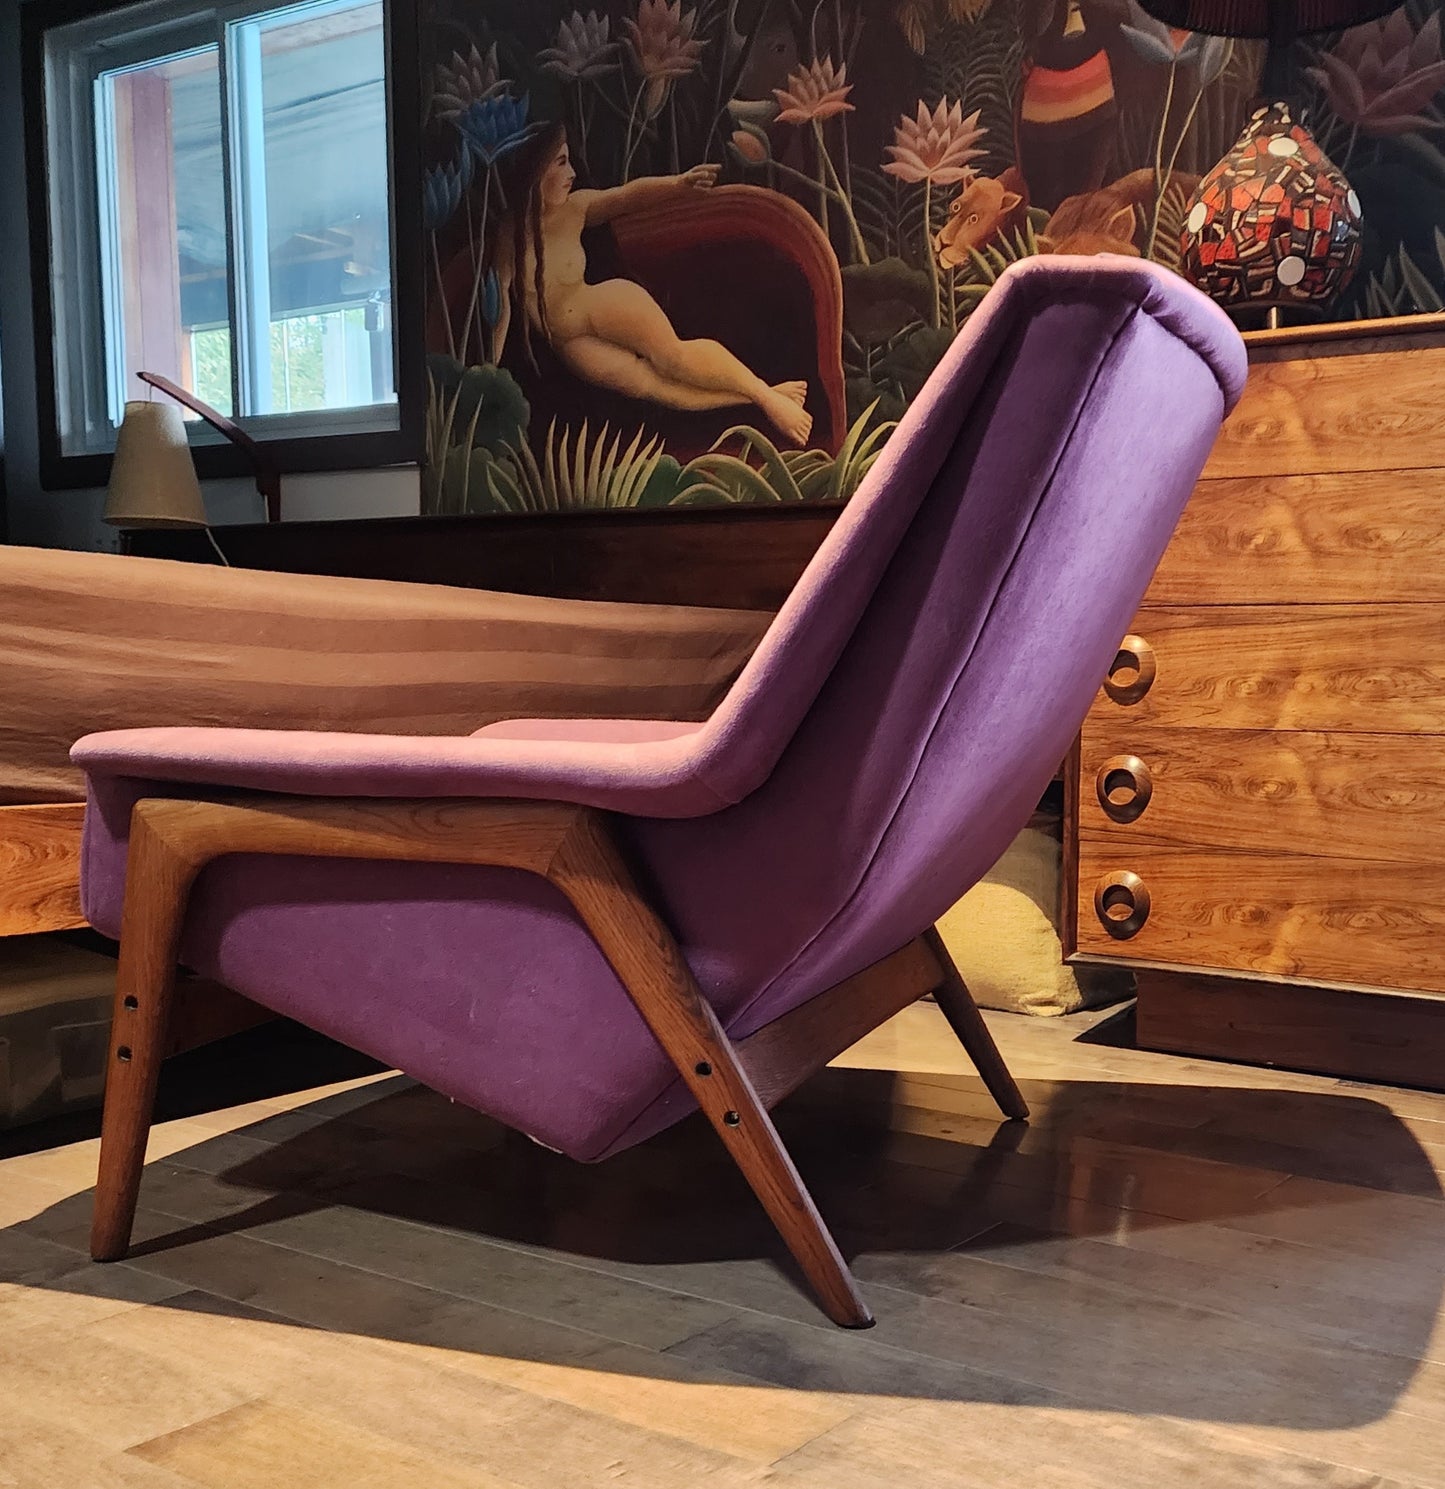 Coming***RESTORED Mid Century Modern Folke Ohlsson lounge chair by Dux